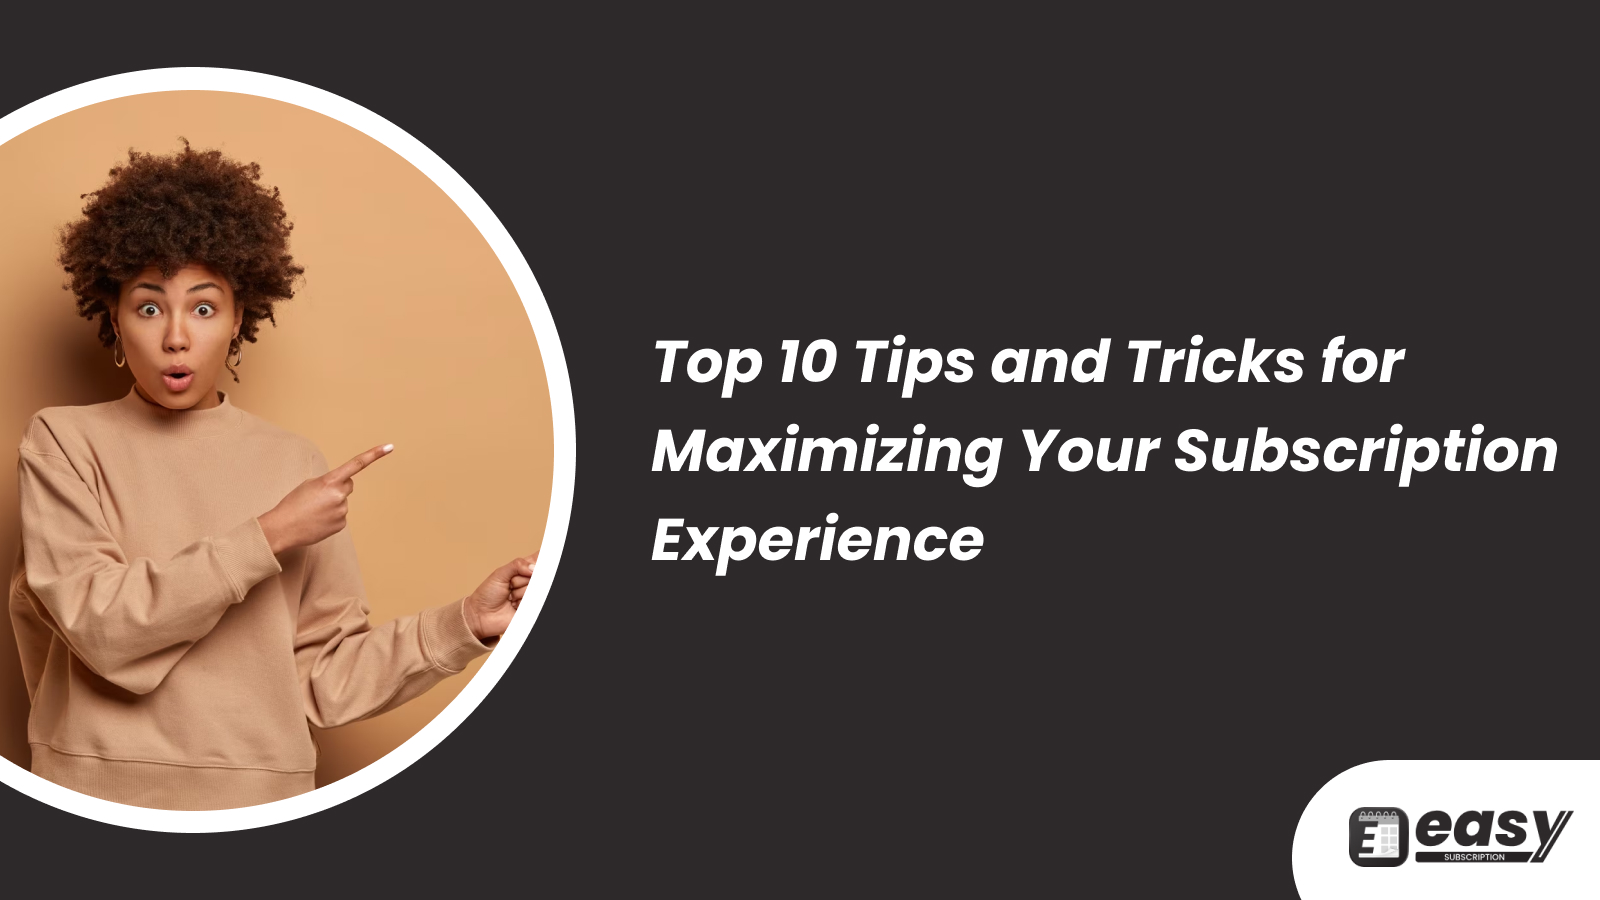 Top 10 Tips and Tricks for Maximizing Your Subscription Experience